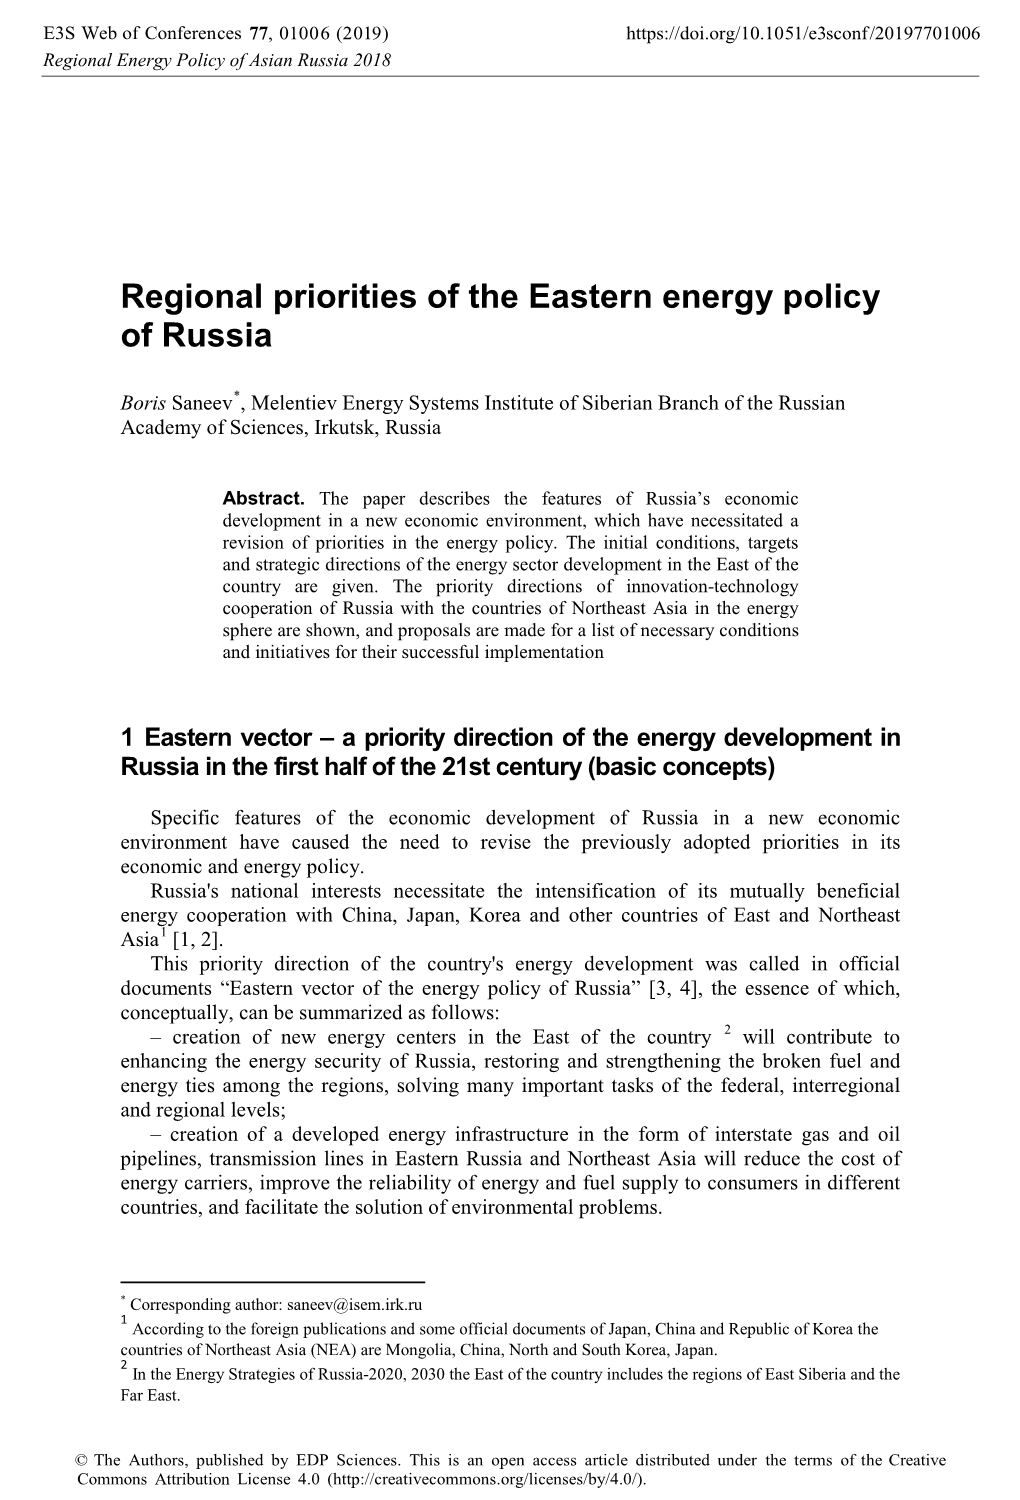 Regional Priorities of the Eastern Energy Policy of Russia